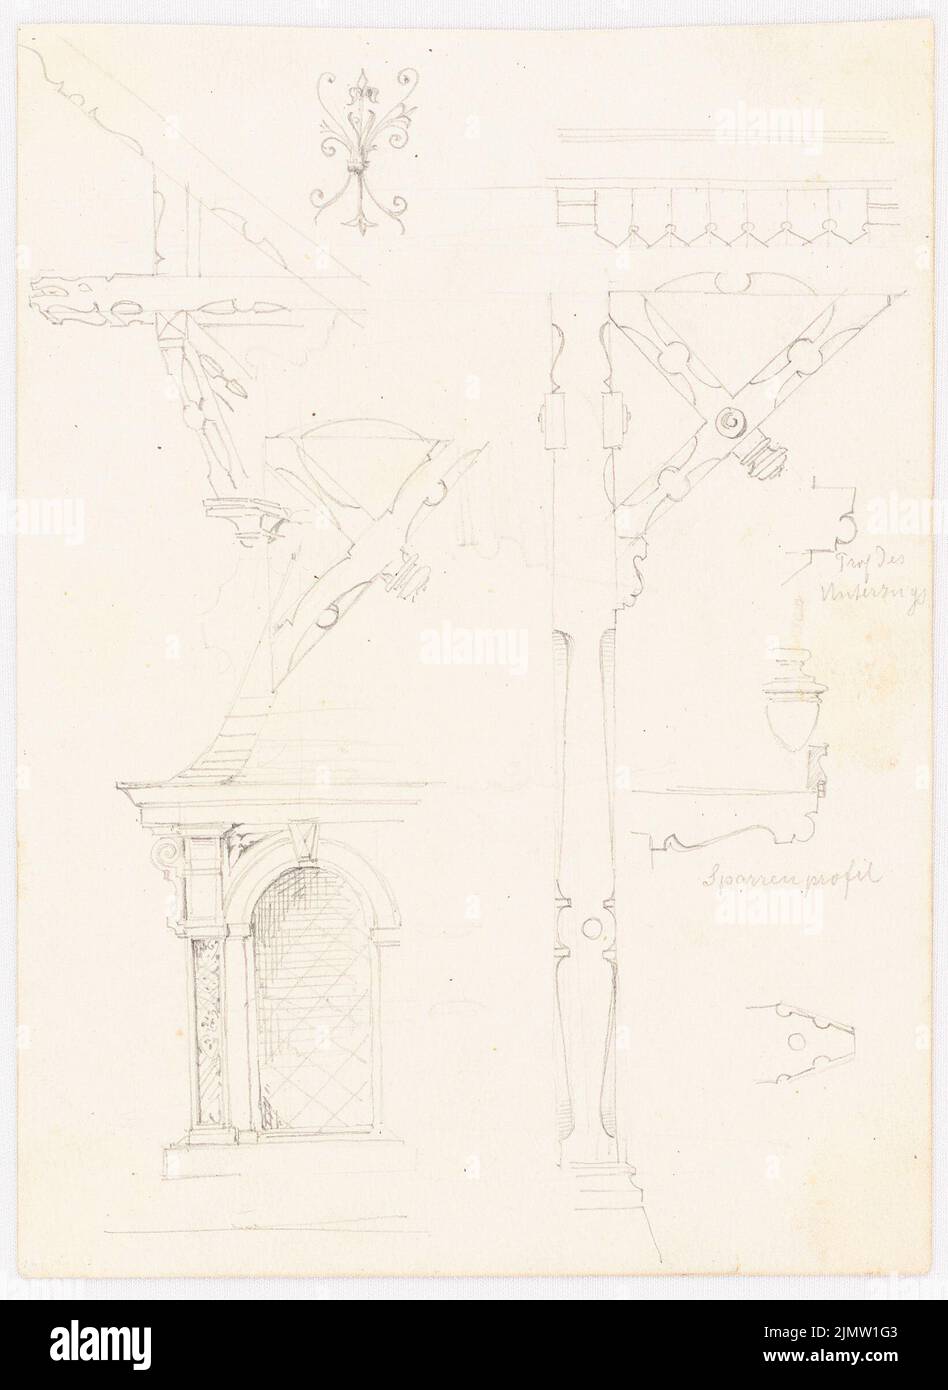 Klingholz Fritz (1861-1921), chandelier, floral motifs, cornice, support etc. (without date): perspective view, view. Pencil on cardboard, 19.1 x 13.9 cm (including scan edges) Klingholz Fritz  (1861-1921): Kronleuchter, florale Motive, Gesimse, Stütze etc. Stock Photo